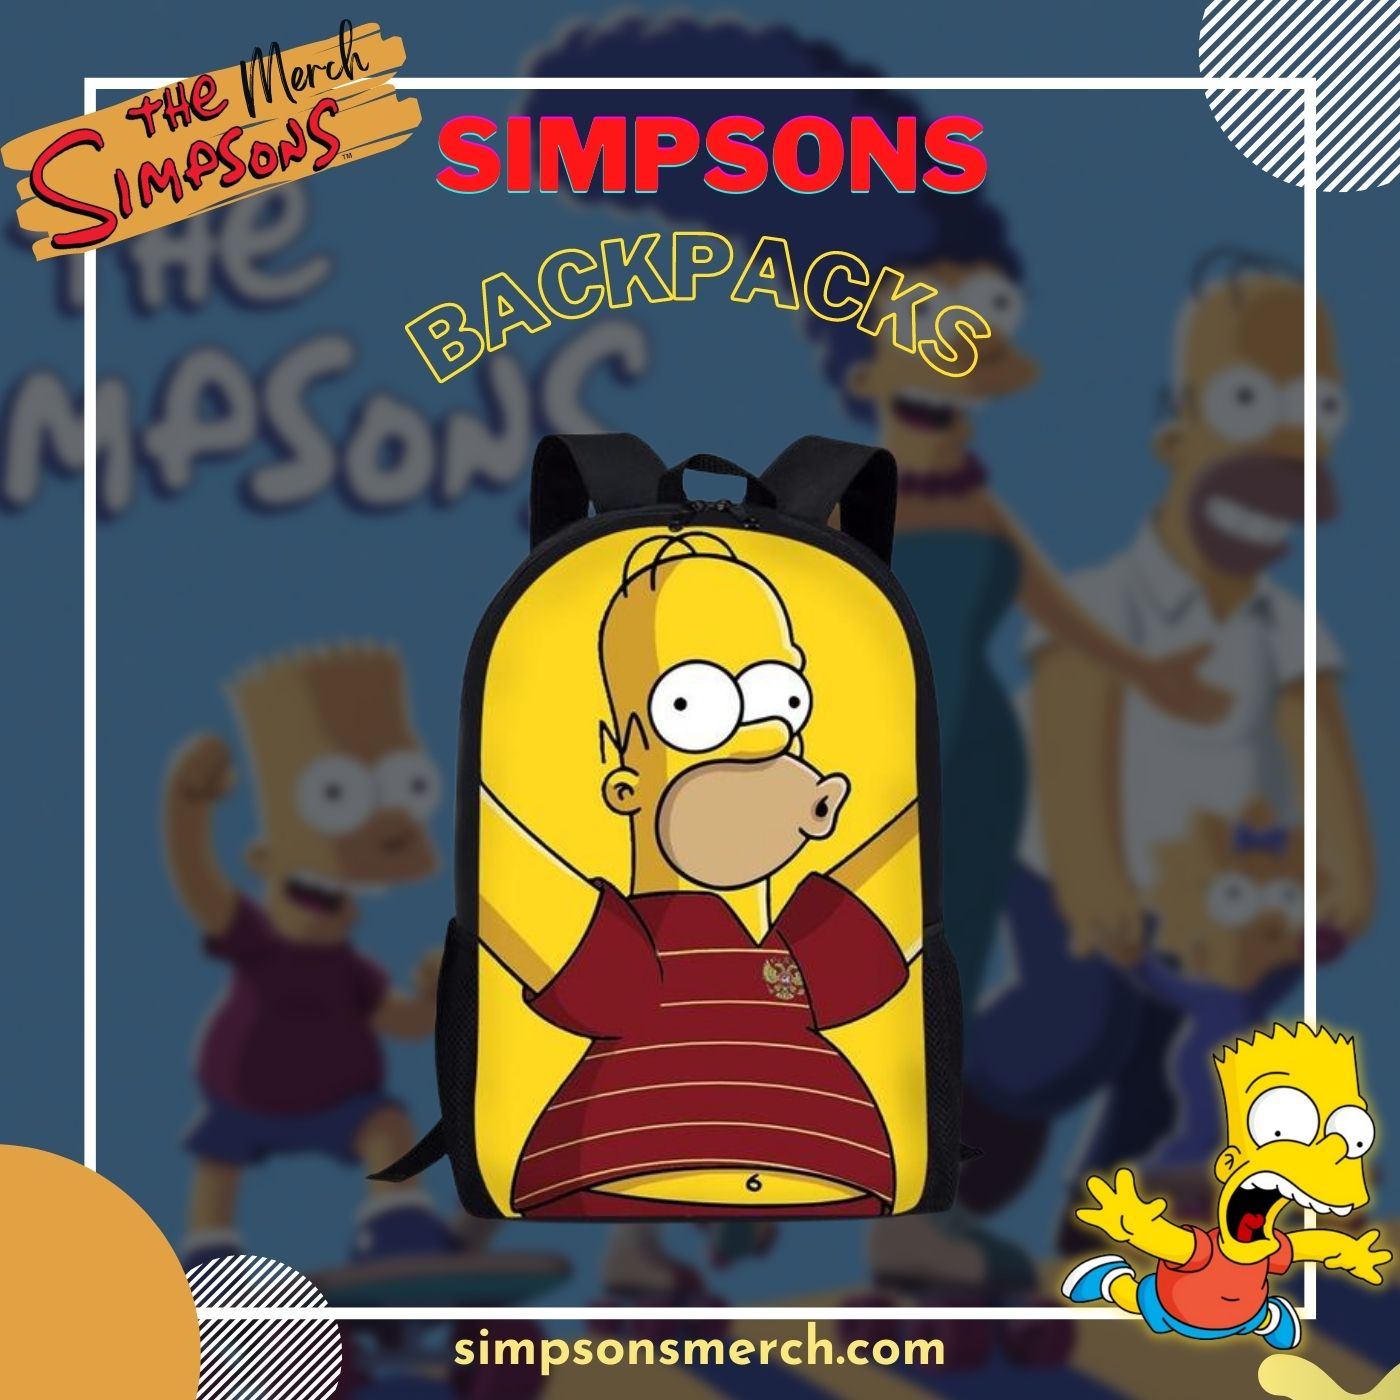 SimpSons Backpacks 1 - The Simpsons Shop